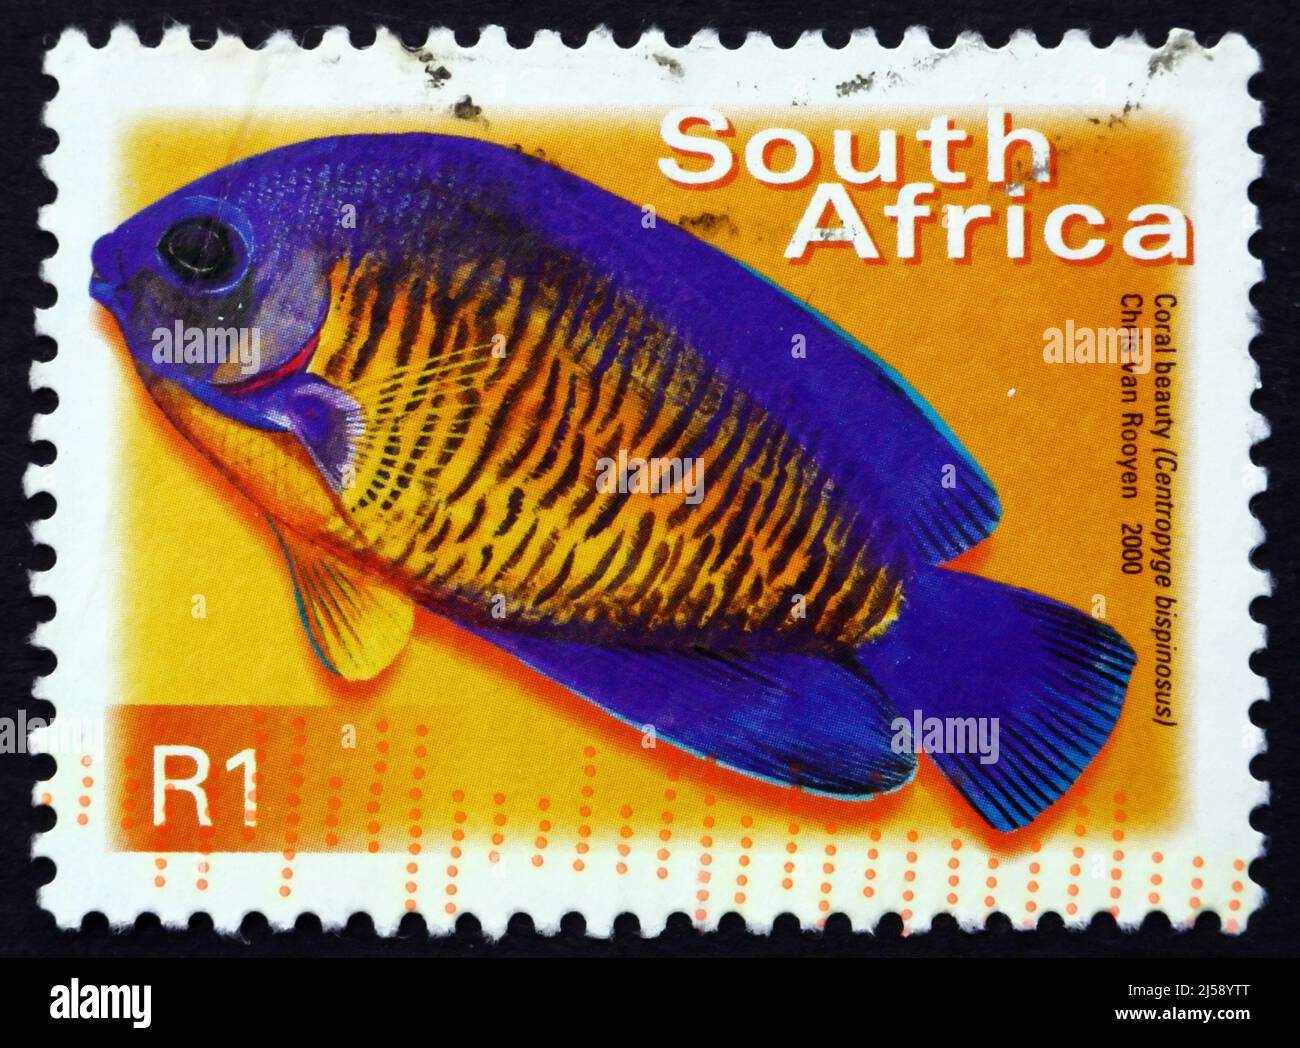 SOUTH AFRICA - CIRCA 2000: a stamp printed in South Africa shows Coral Beauty, Centropyge Bispinosus, Marine Tropical Fish, circa 2000 Stock Photo